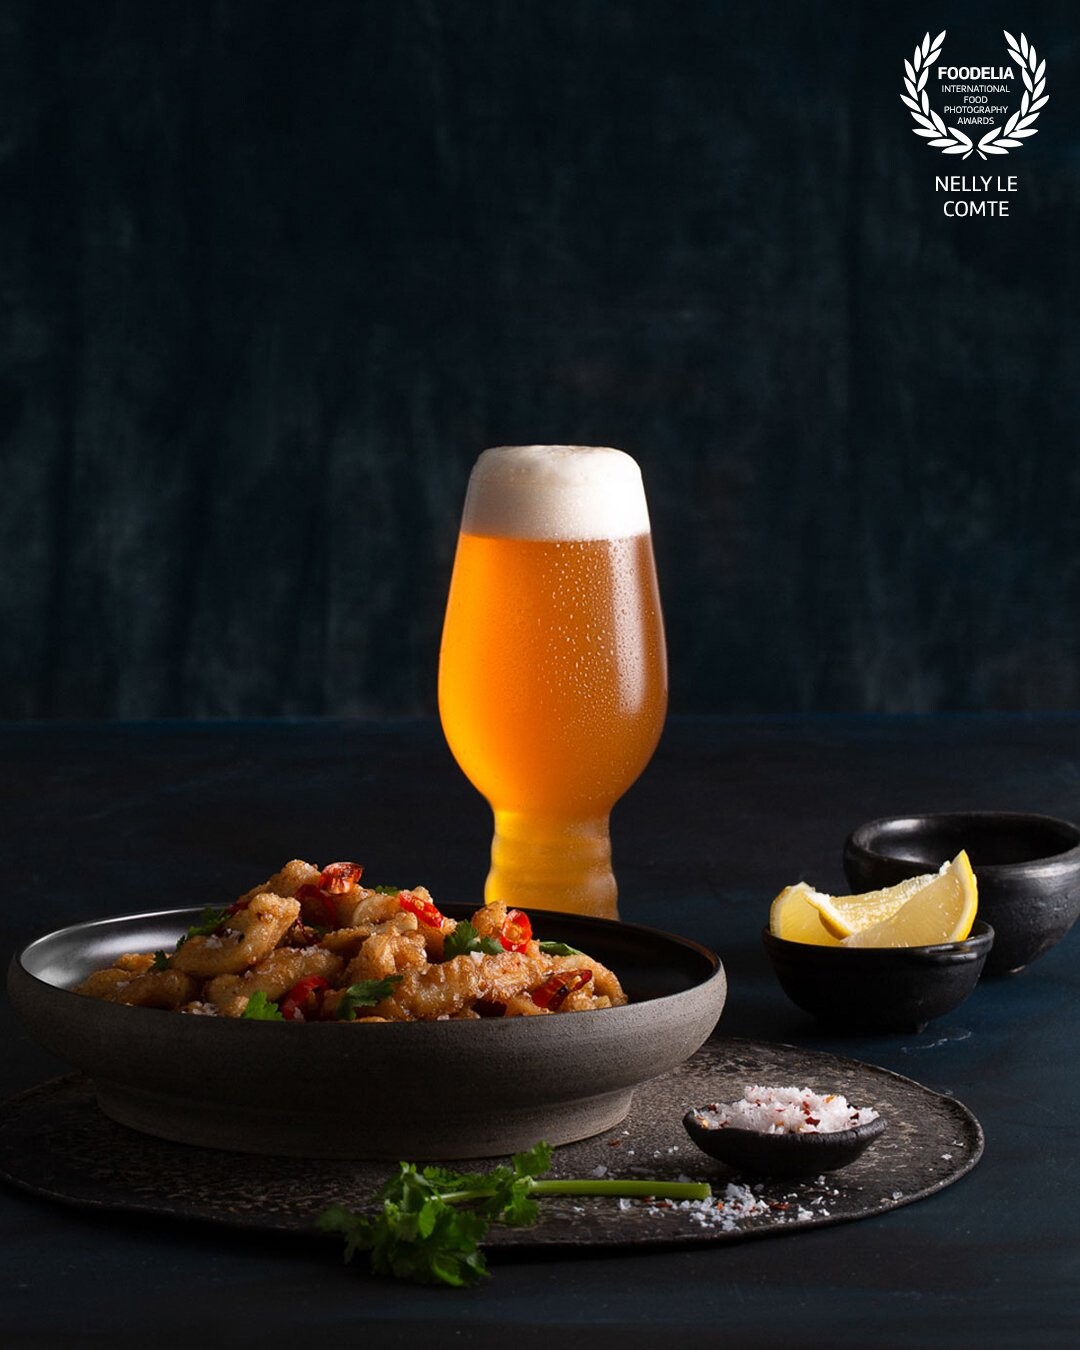 Studio photography with food stylist @janetmitchellstylist working on beer. Being creative with one @bowens light in a way it illuminates the food and highlights the beer in the glass. Ask me how ???<br />
Photographed with Canon @canonaustralia<br />
Loving the golden toned calamari which certainly was a treat to eat afterwards, along with the cool crips beer.⁠<br />
⁠<br />
Perfectly planned the shoot on a Friday, so drinks allowed.⁠